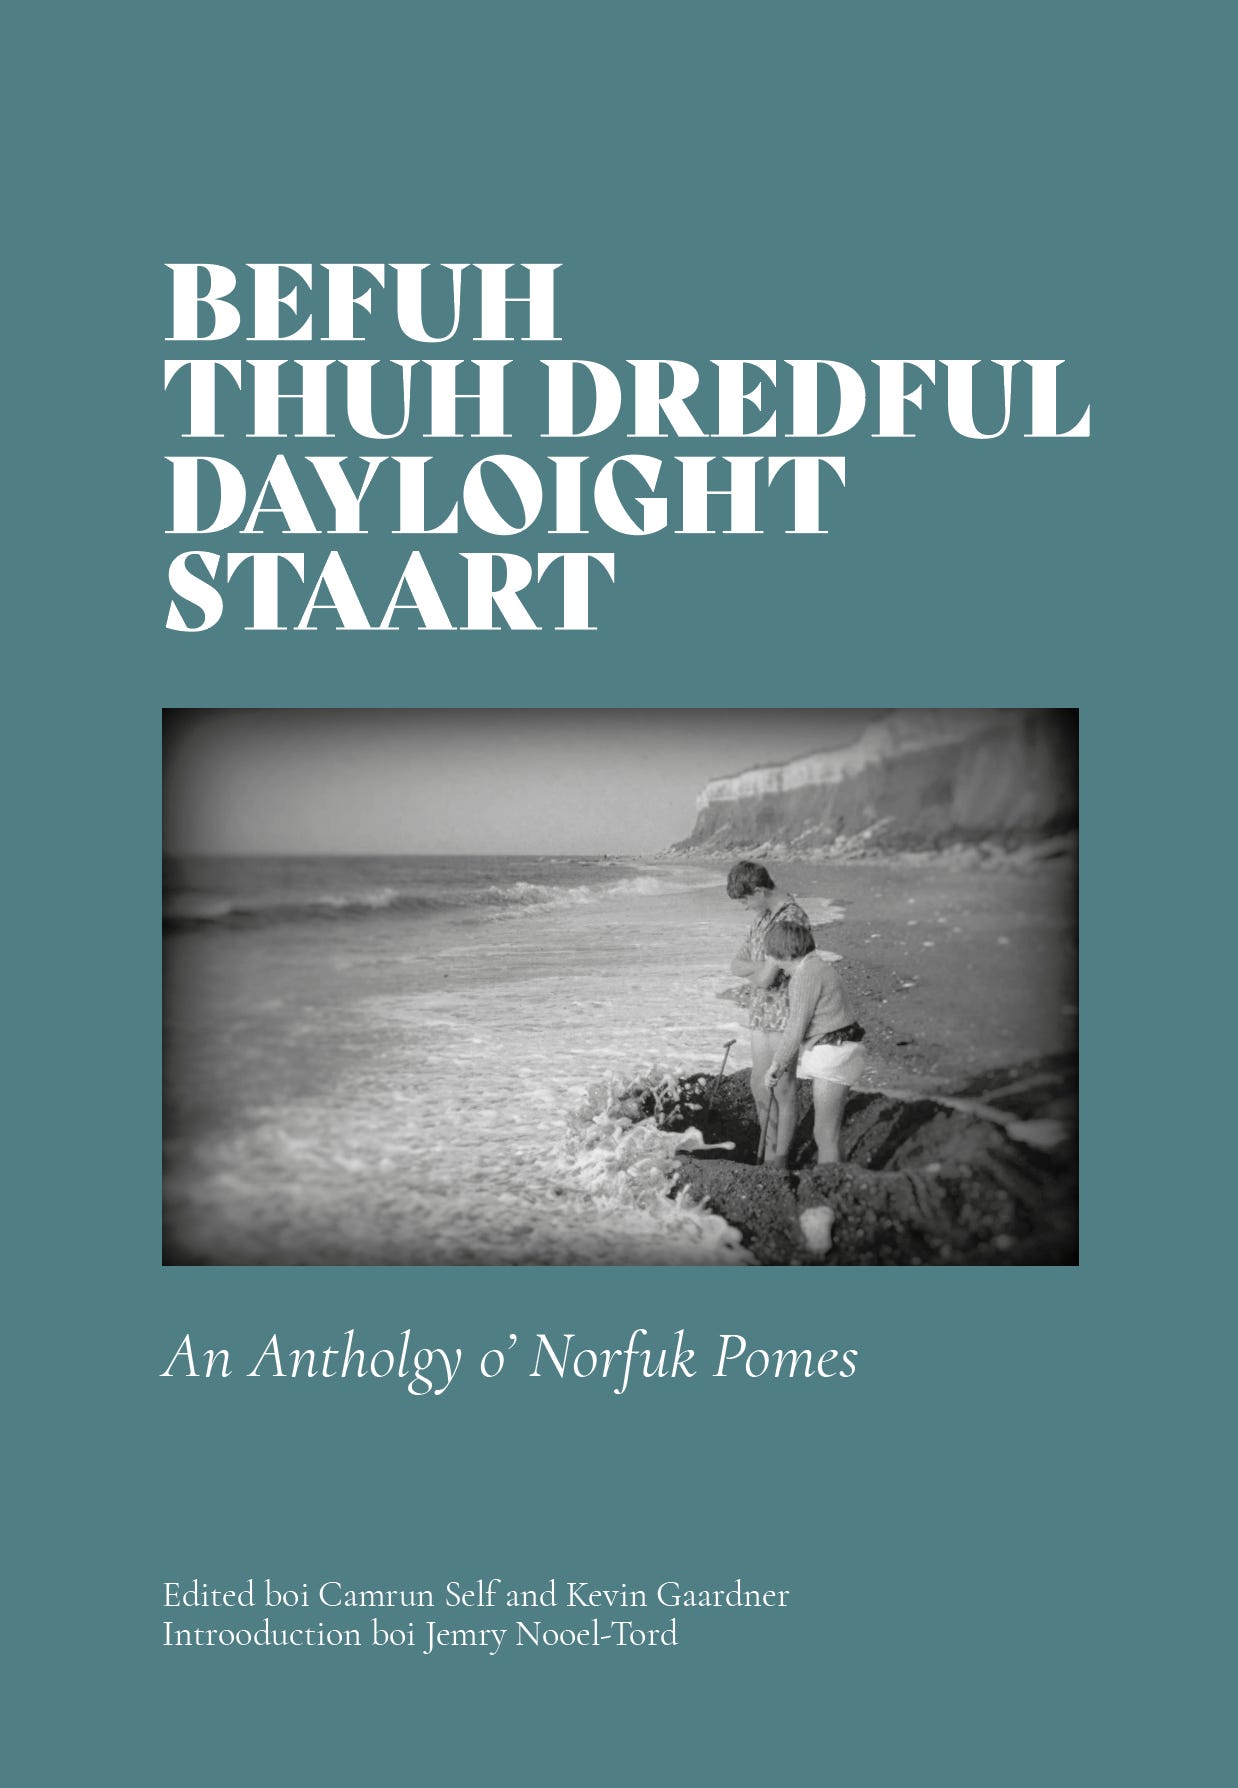 Anthology cover with text rewritten in Norfolk accent: Befuh Thuh Dredful Dayloight Staart